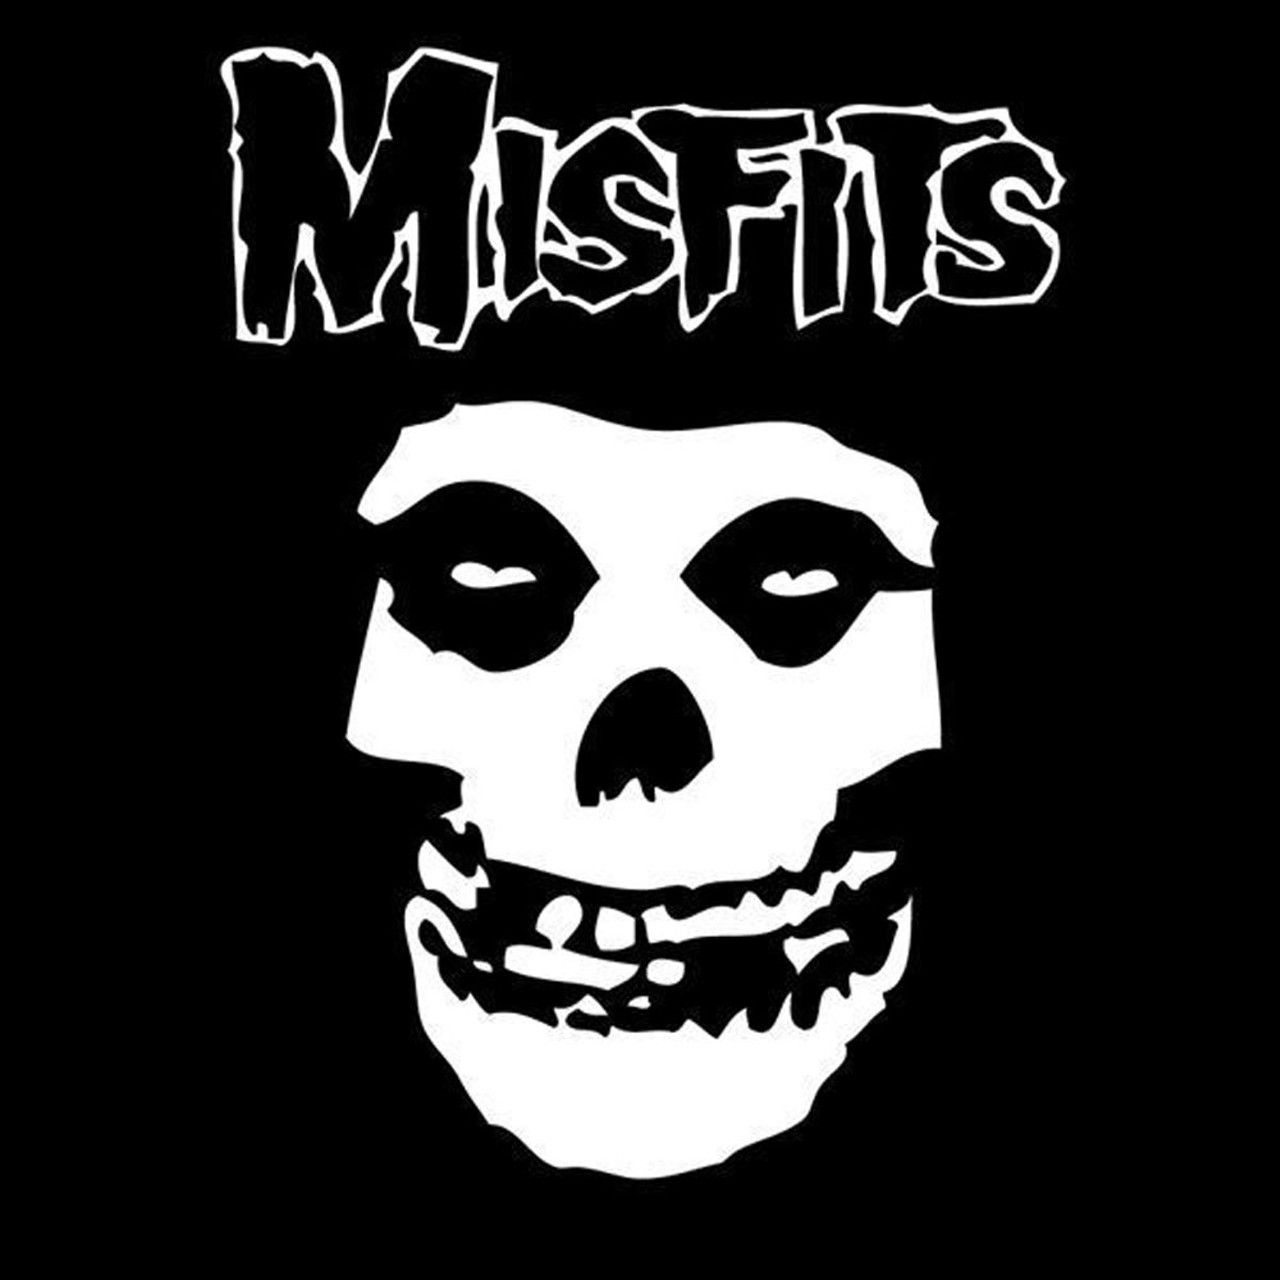 The Original Misfits
Okay, so it&#146;s not all of the original Misfits, but singer Glenn Danzig and bassist Jerry Only will be in attendance to bring fans back to the gory-core days of Misfits rage. Sure, reunion shows can sometimes be a little awkward at times, but the Misfits are what reunion show dreams are made of, and they will be the perfect closing act to the weekend festival. Sunday @ 8:45 p.m., Riot Stage